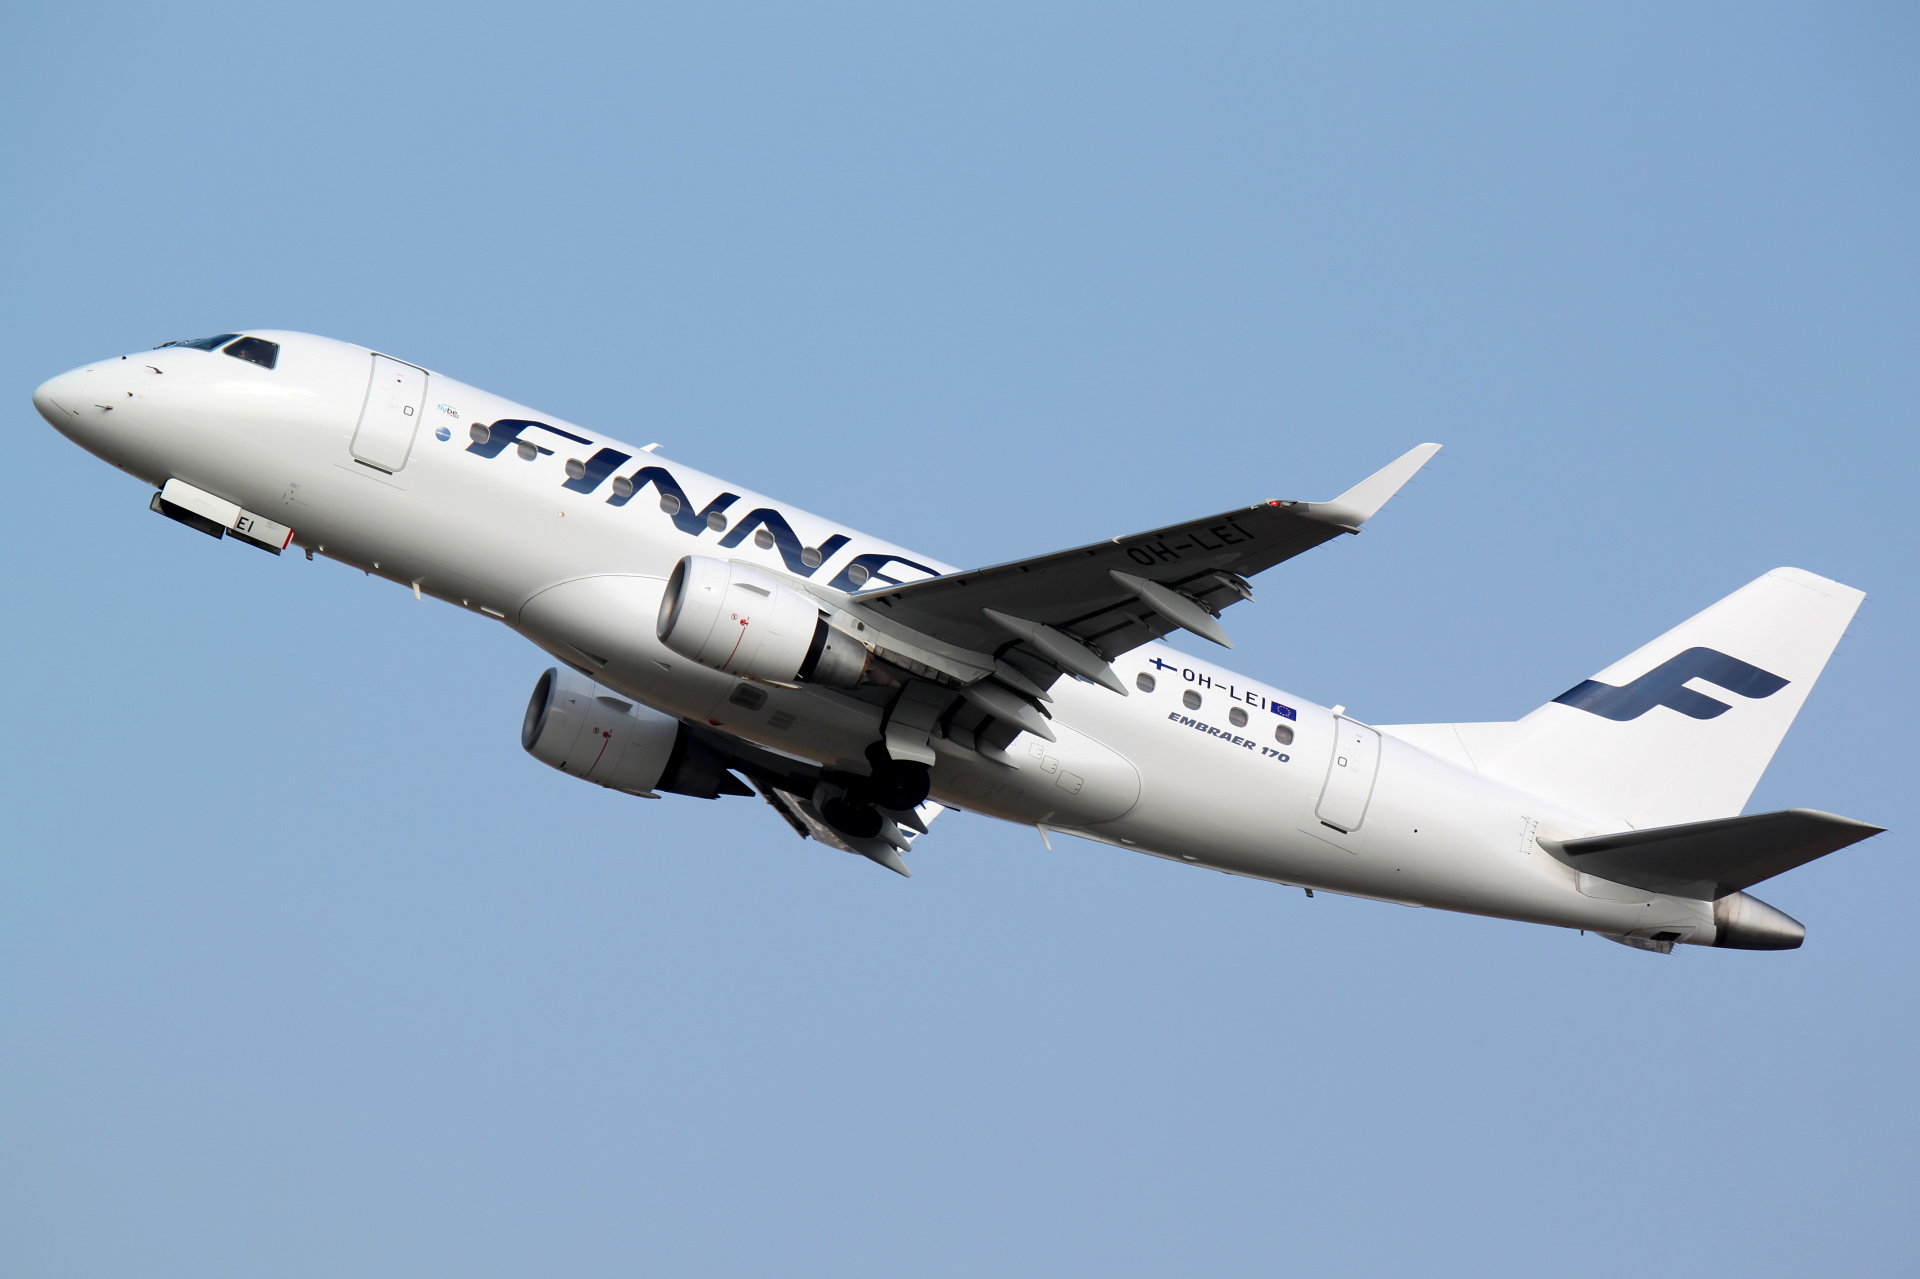 OH-LEI (new livery) (Aircraft » EPWA Spotting » Embraer E170 » Finnair)